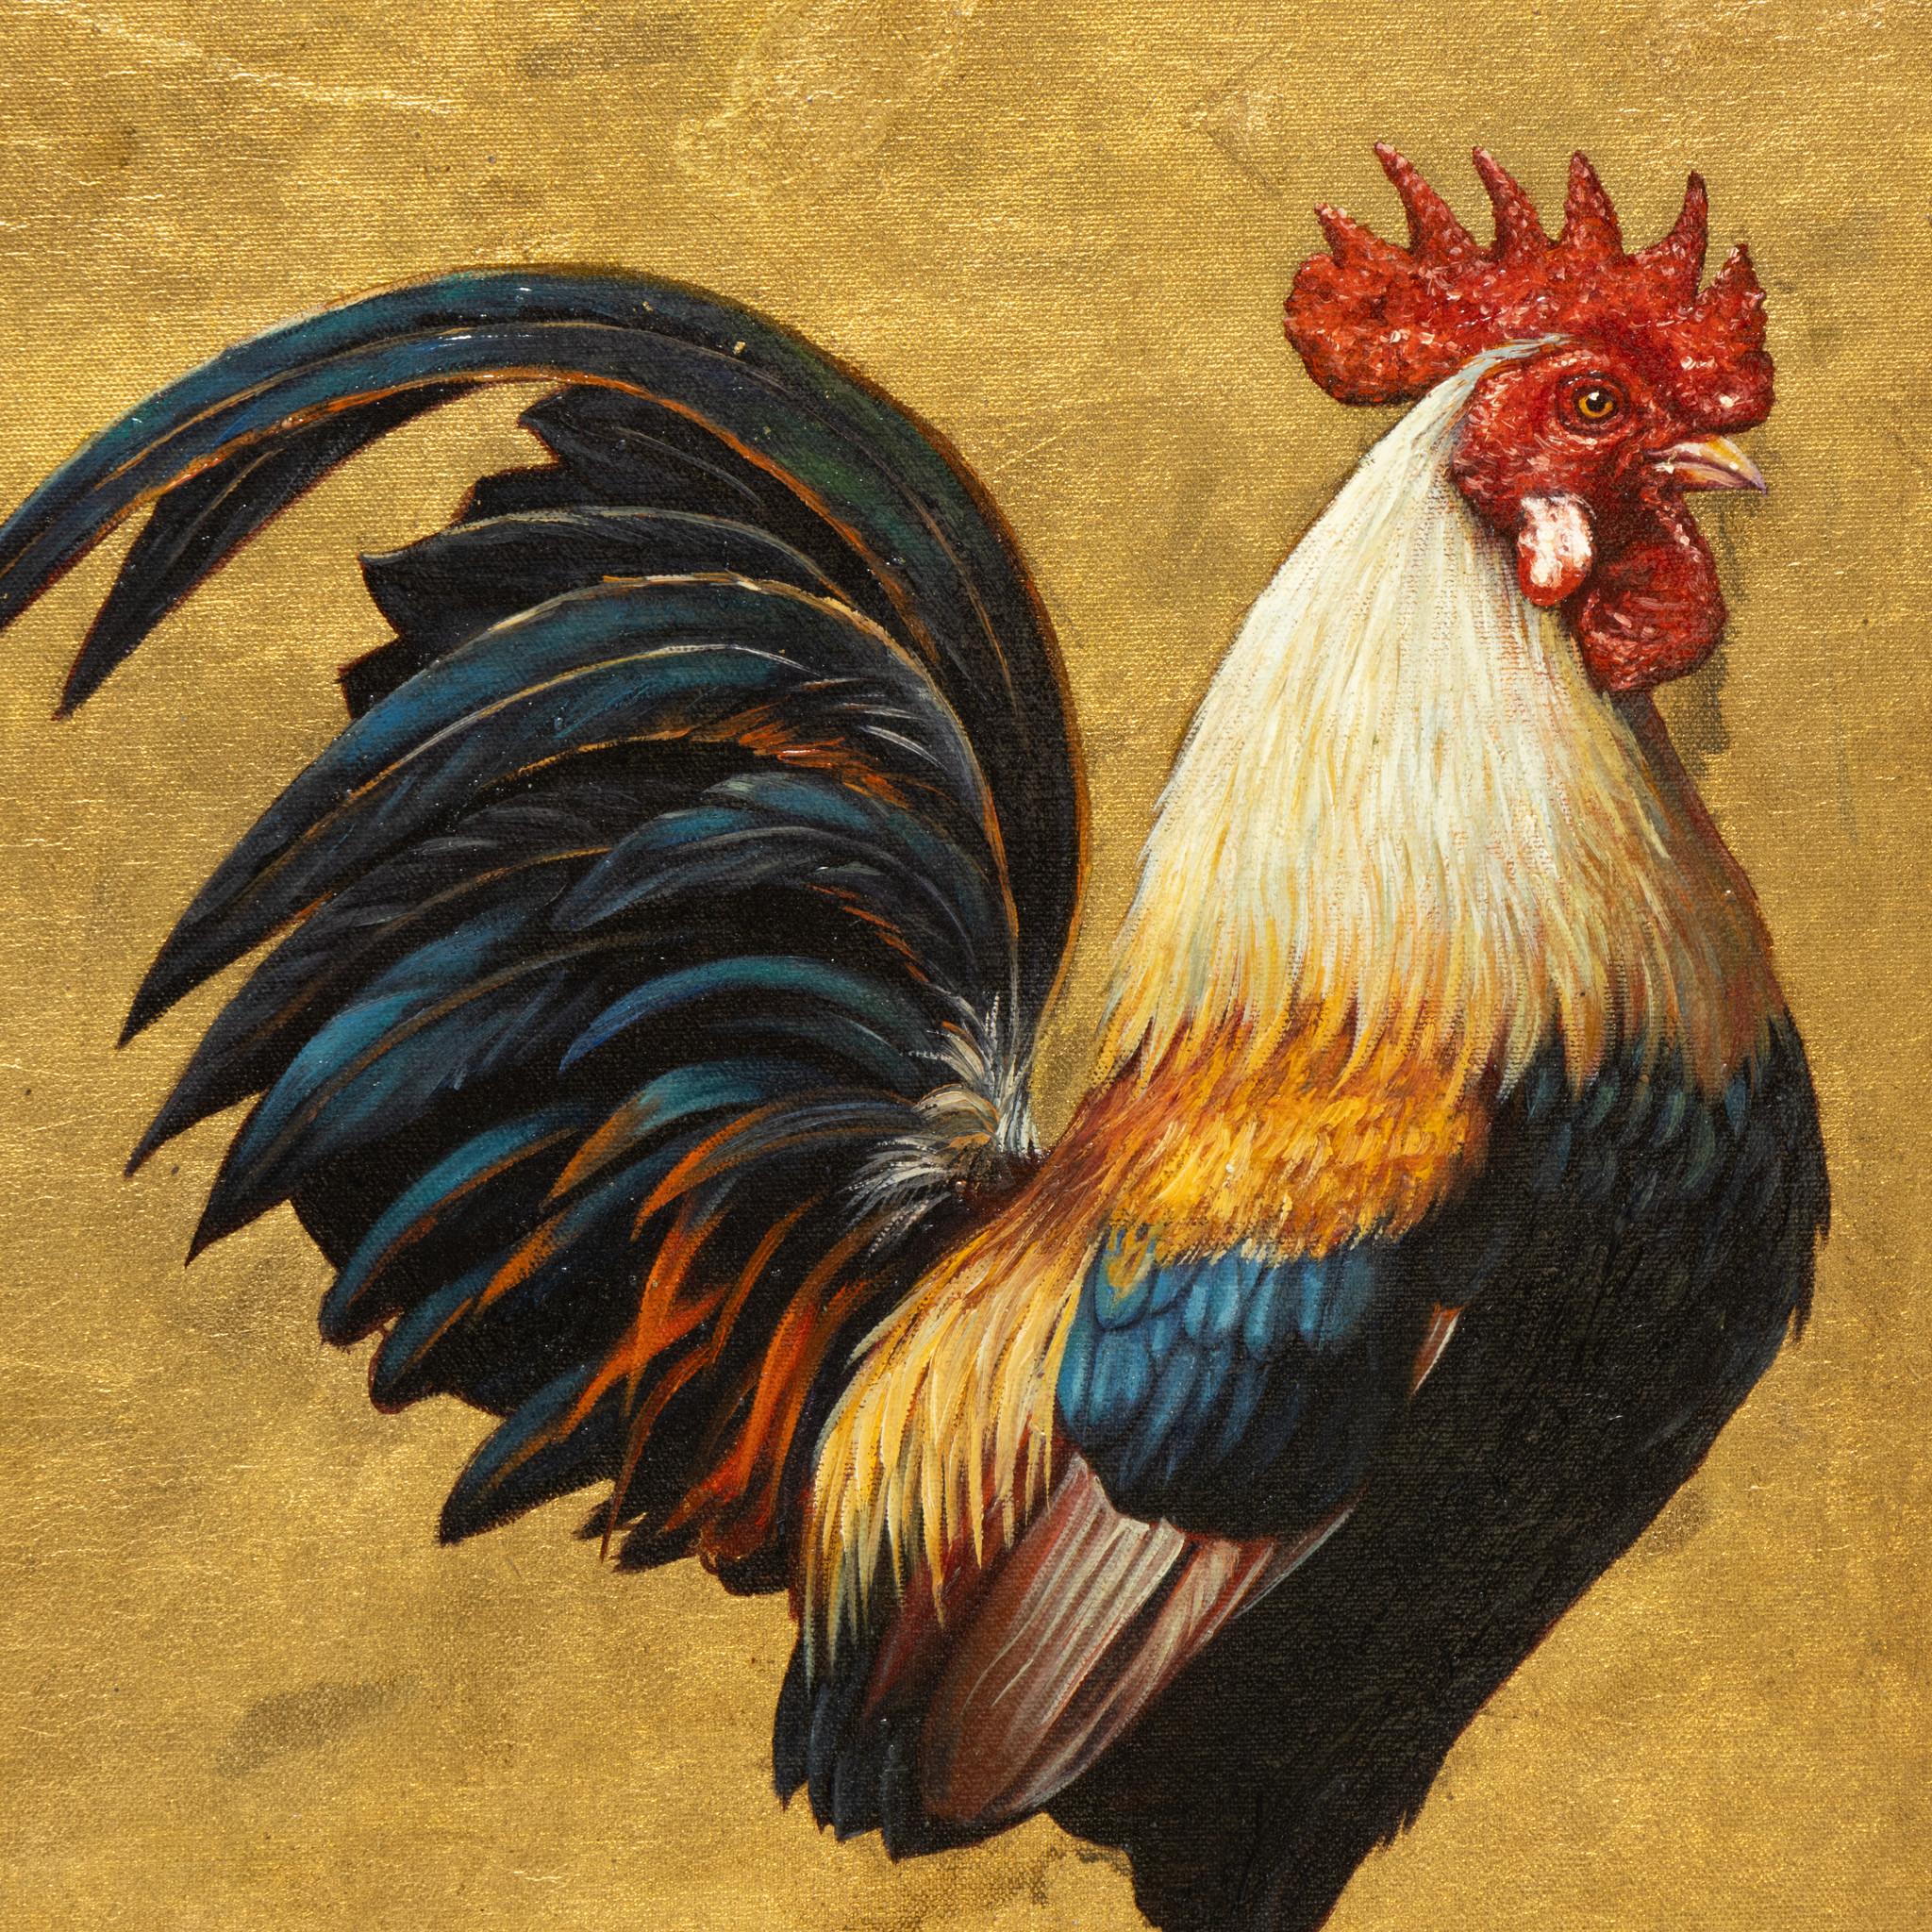 Original oil painting by E. Tapia. Piece portrays a colorful rooster against gold background on grass. Rooster features colors of blue, gold, red, cream, and green. A well done painting that would display nicely in a farmhouse or rustic home. Circa